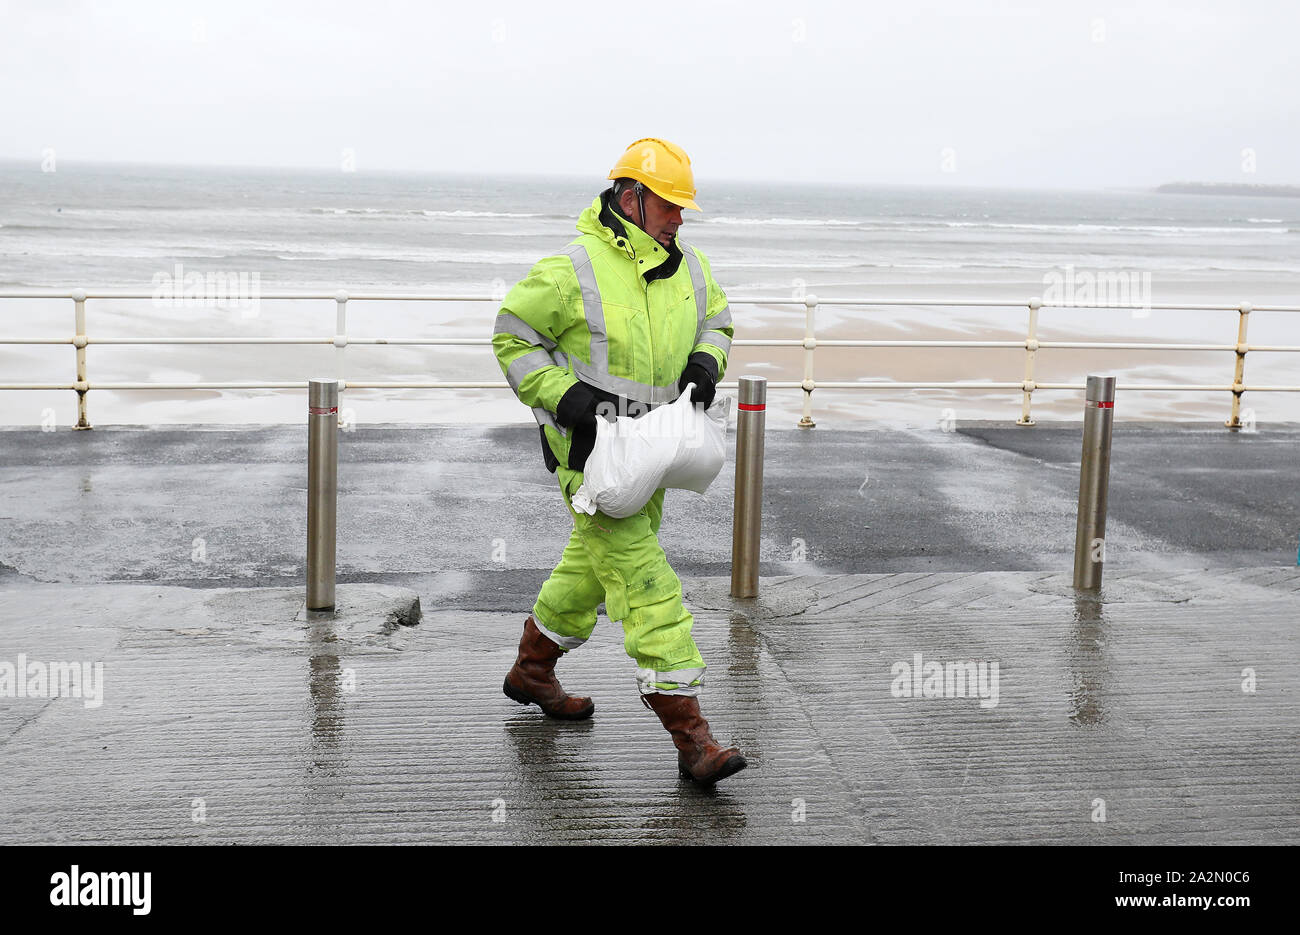 Members of Clare County council place sandbags at shops on the sea front in Lahinch, County Clare, on the West Coast of Ireland in preparation for storm Lorenzo, as a status orange wind warning and a yellow rain warning have been issued. Stock Photo